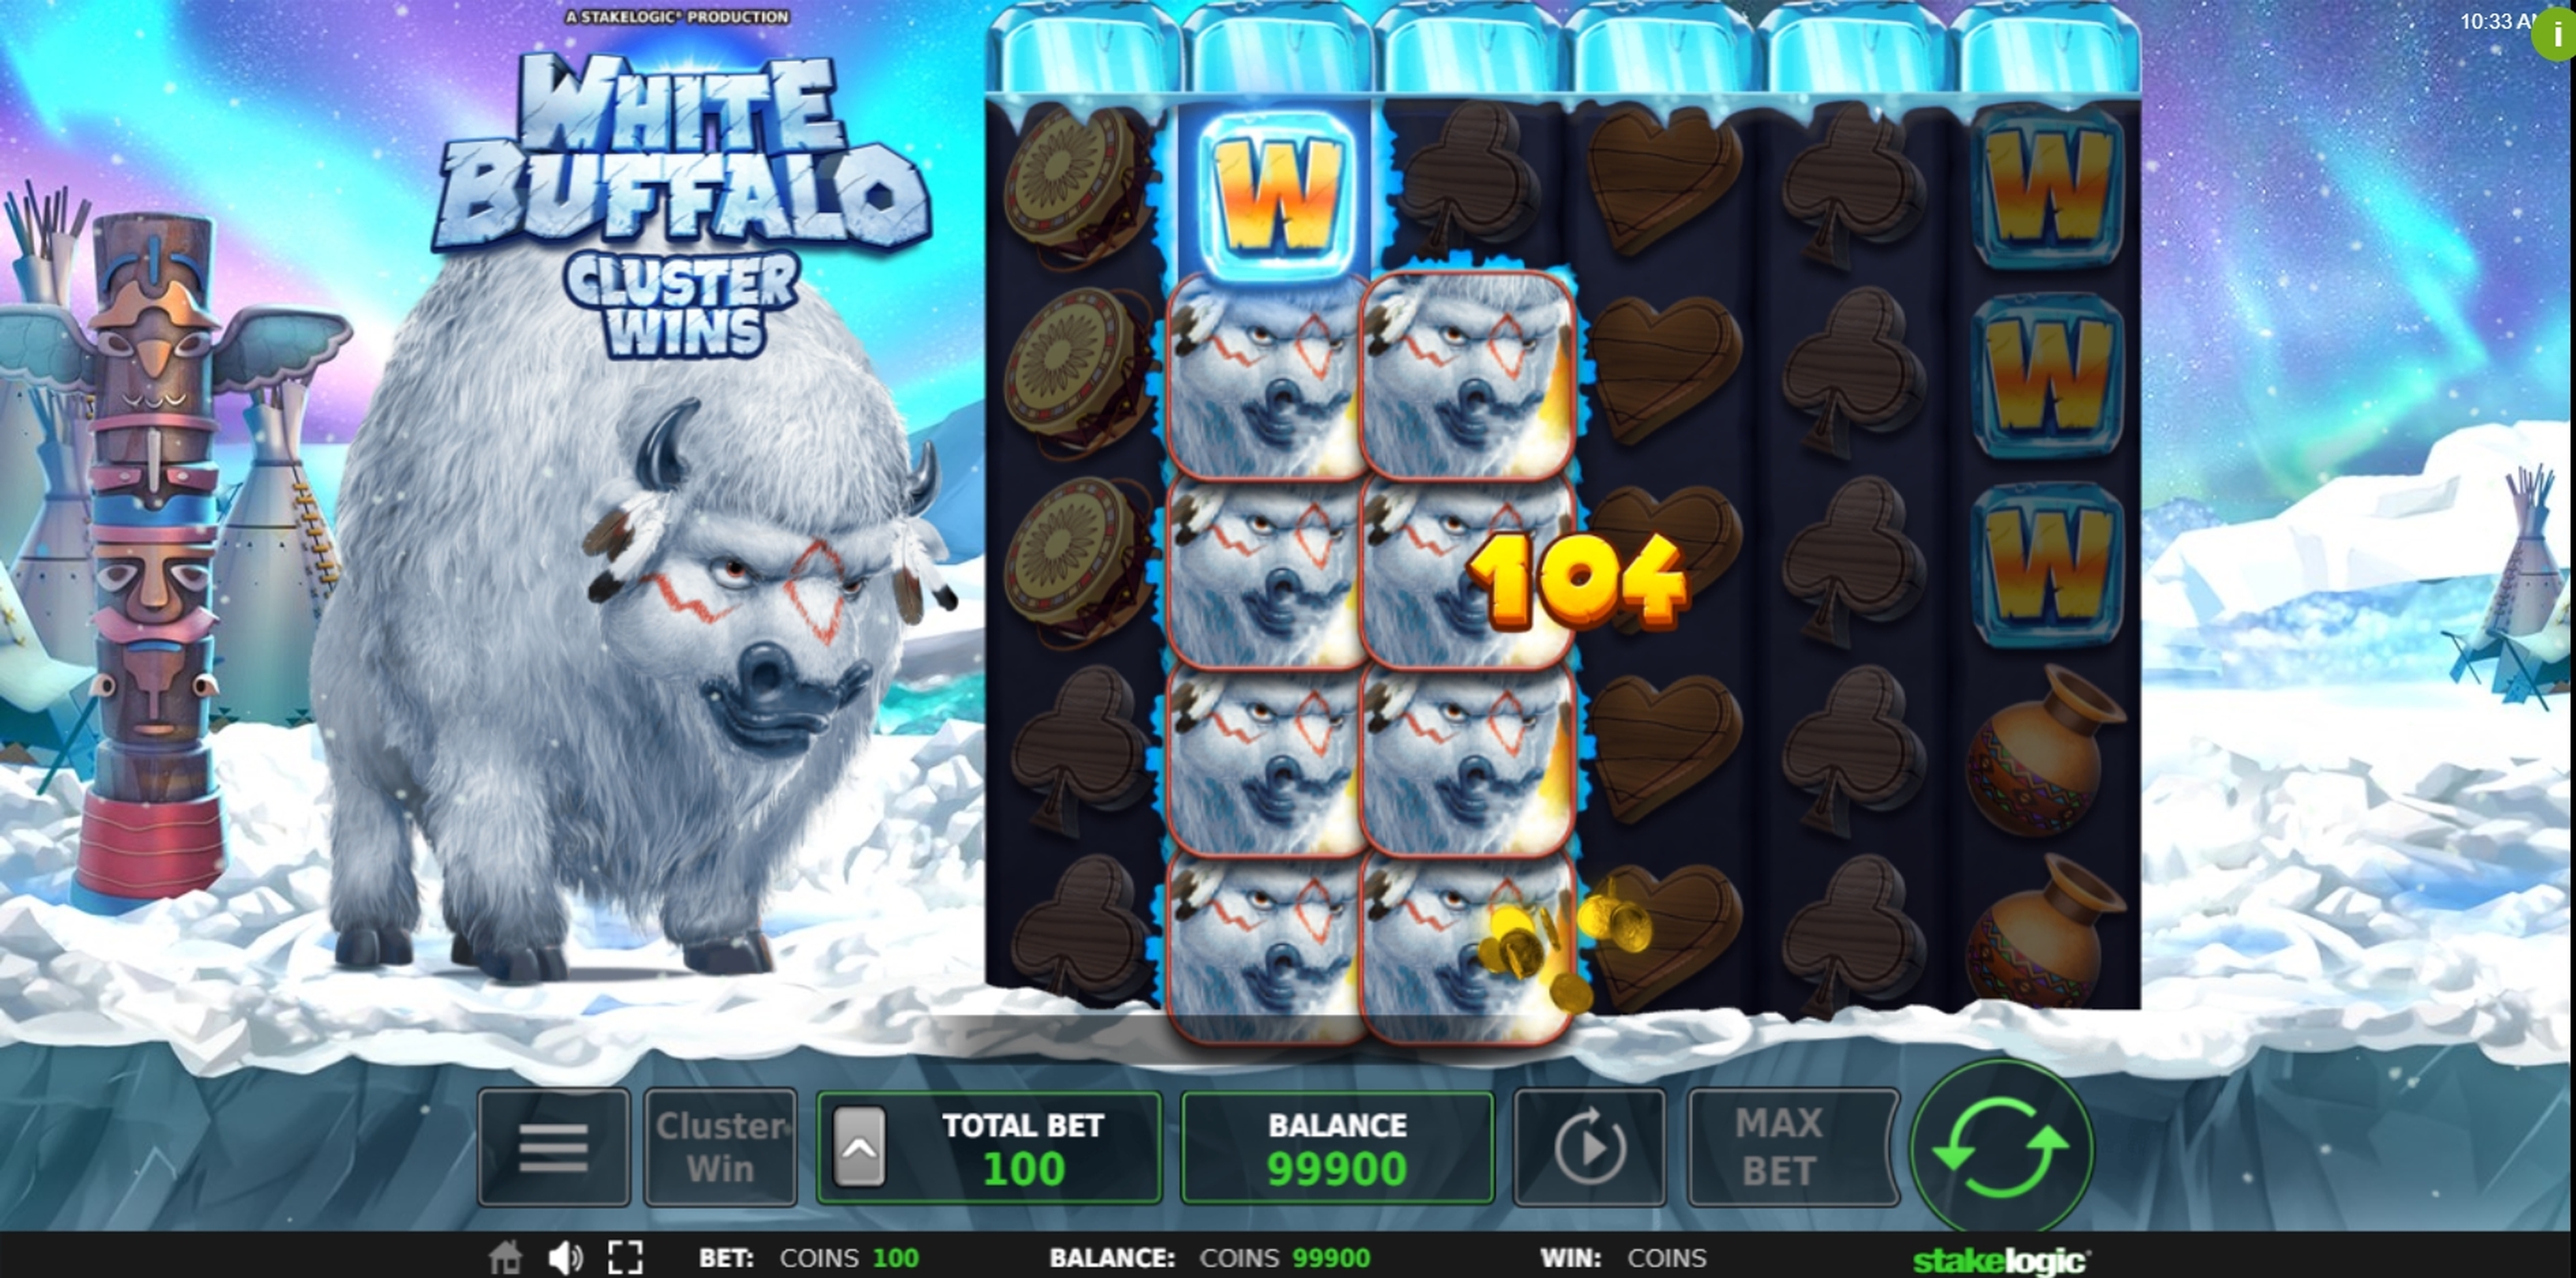 Win Money in White Buffalo Cluster Wins Free Slot Game by Stakelogic